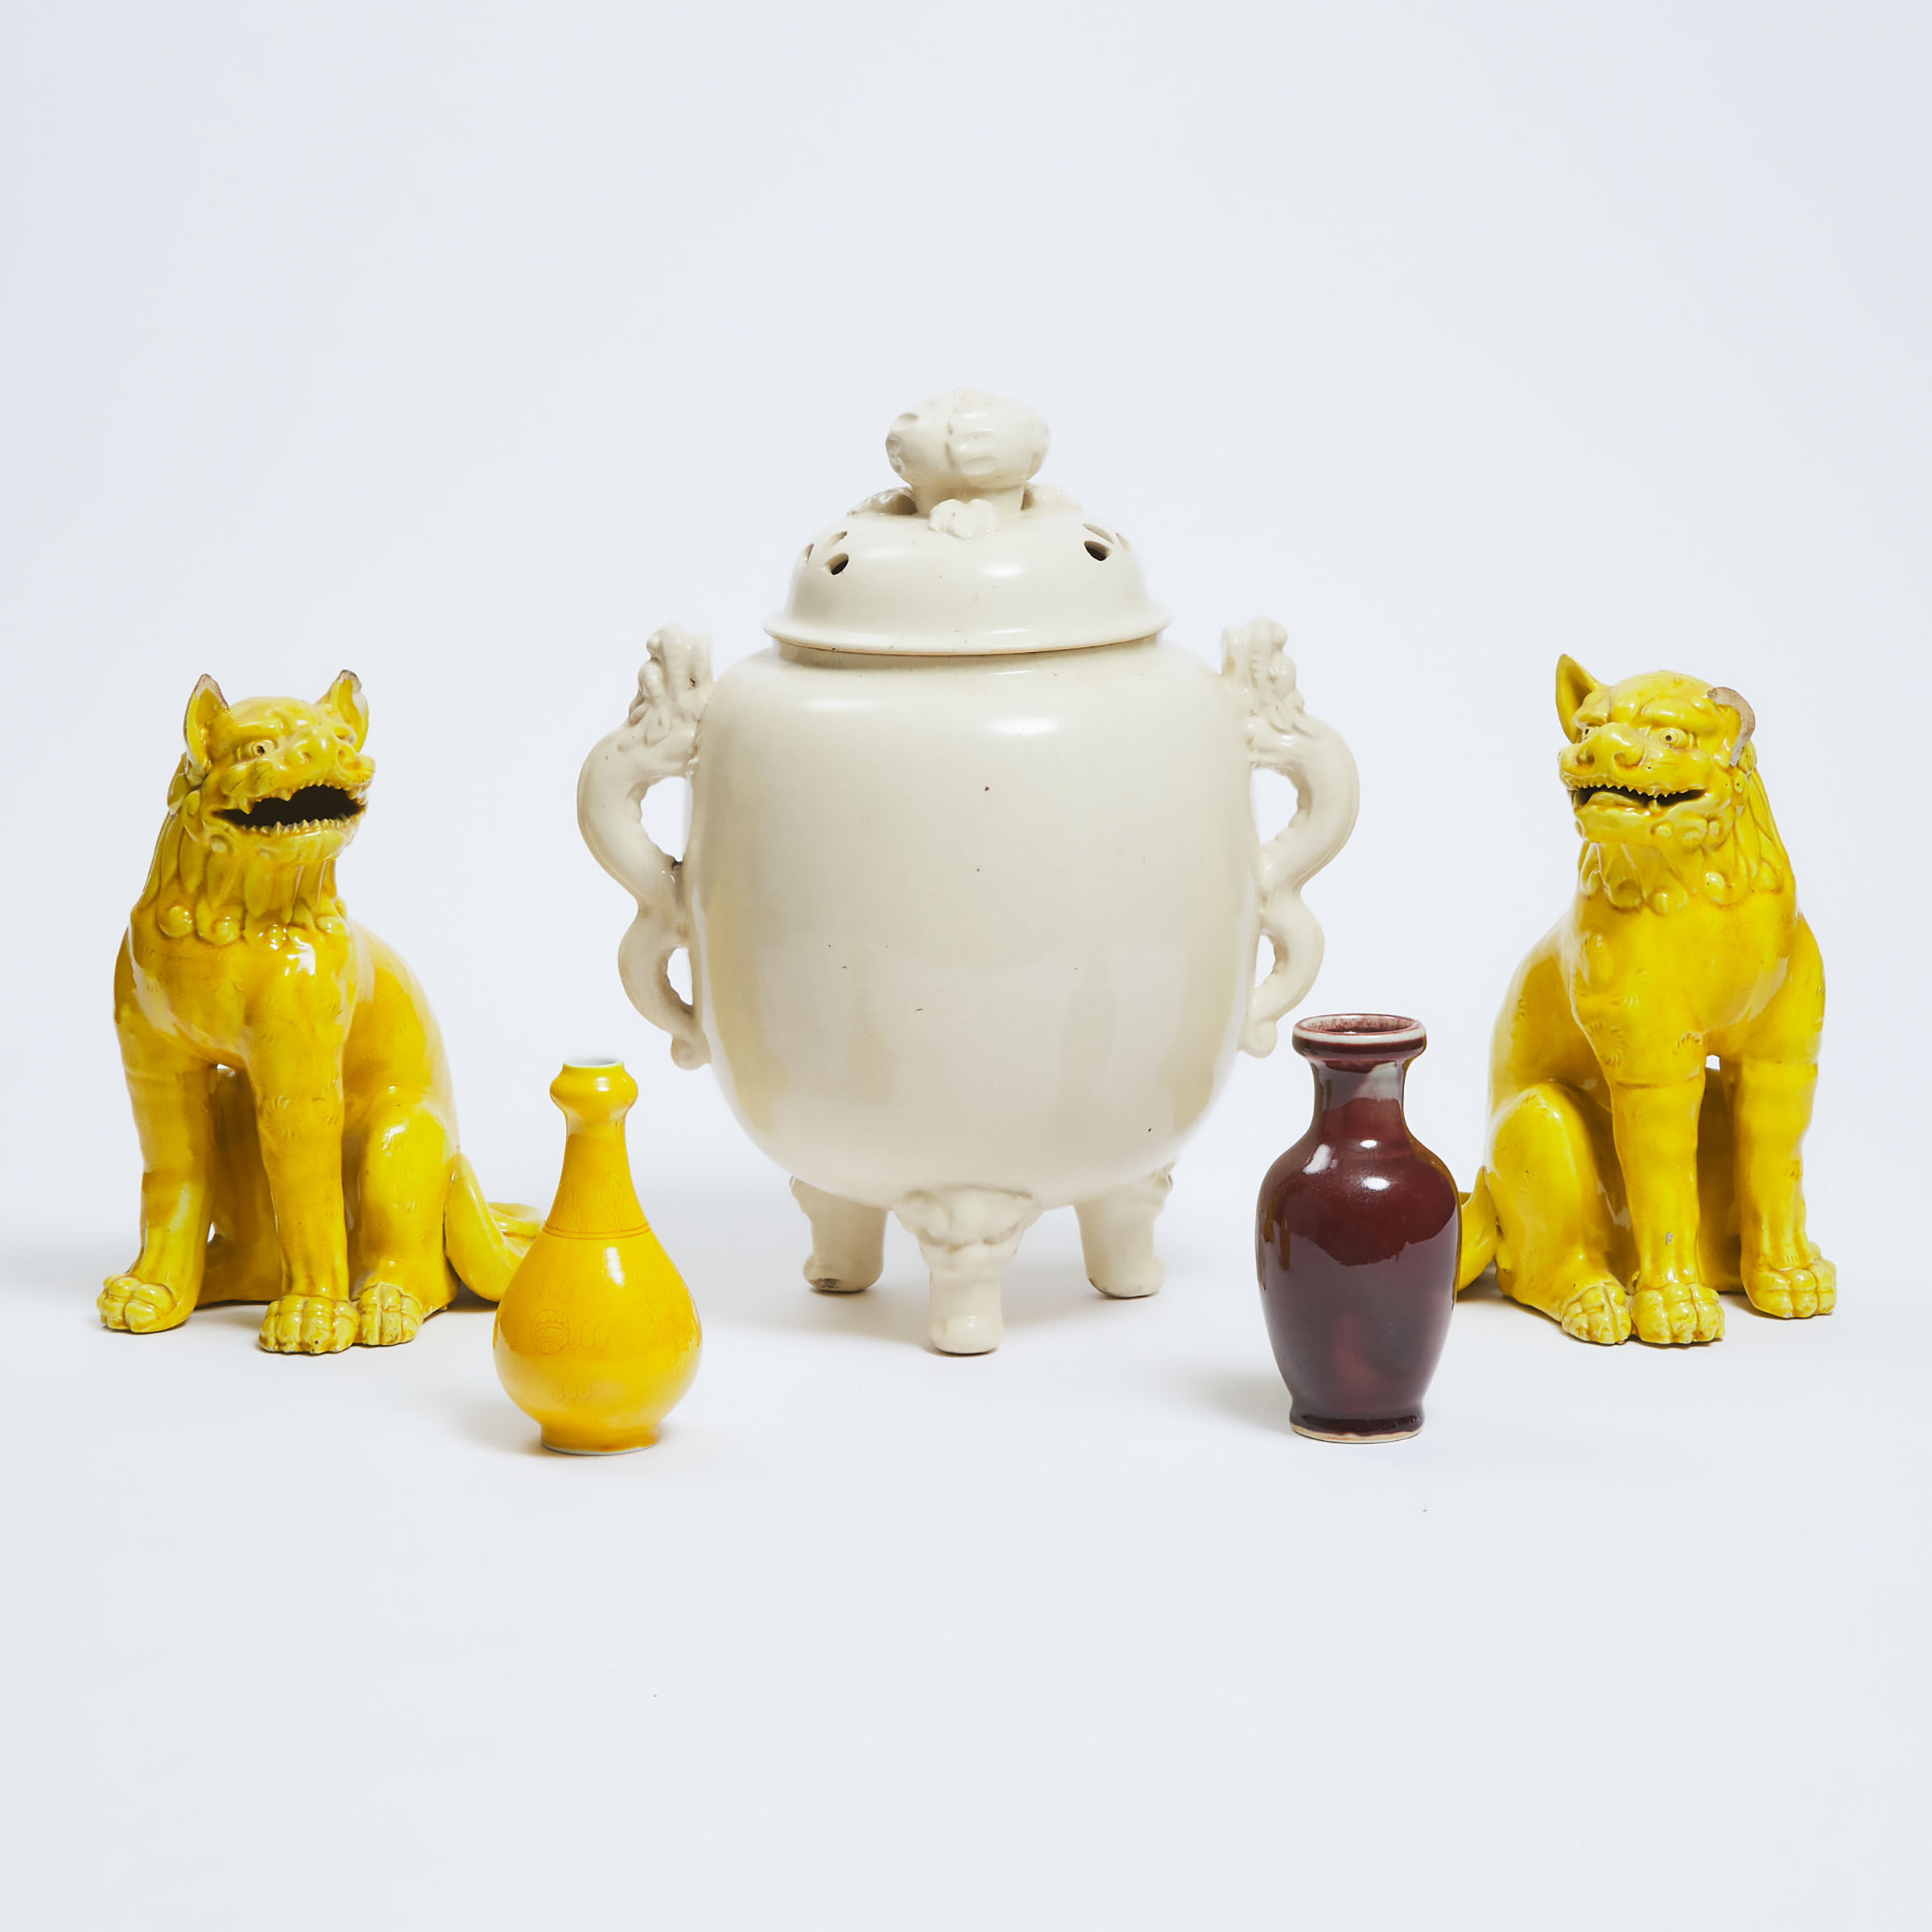 A Pair of Yellow Crackled-Glaze Lions, a White Crackled Glaze Censer, and Two Miniature Vases